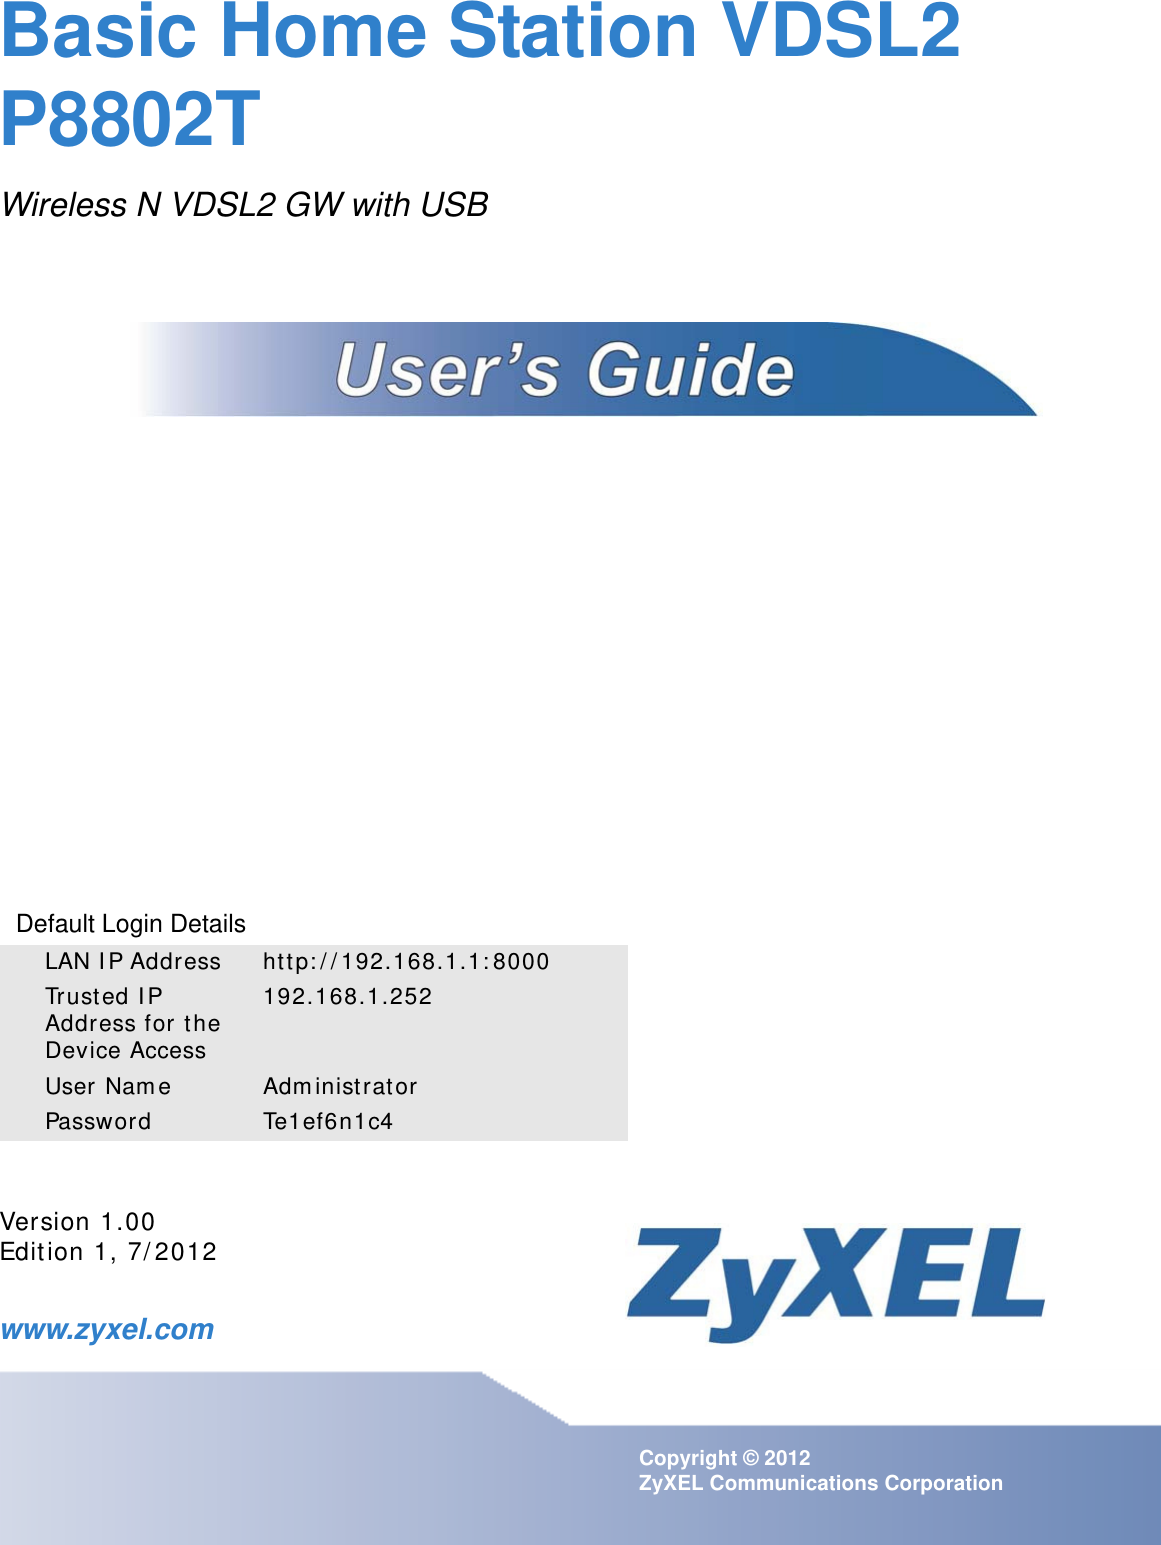 www.zyxel.comwww.zyxel.comBasic Home Station VDSL2 P8802TWireless N VDSL2 GW with USB Copyright © 2012 ZyXEL Communications CorporationVersion 1.00Edit ion 1, 7/ 2012Default Login DetailsLAN I P Address ht tp: / / 192.168.1.1: 8000Trusted I P Address for t he Device Access192.168.1.252User Nam e Adm inistrat orPassword Te1ef6n1c4